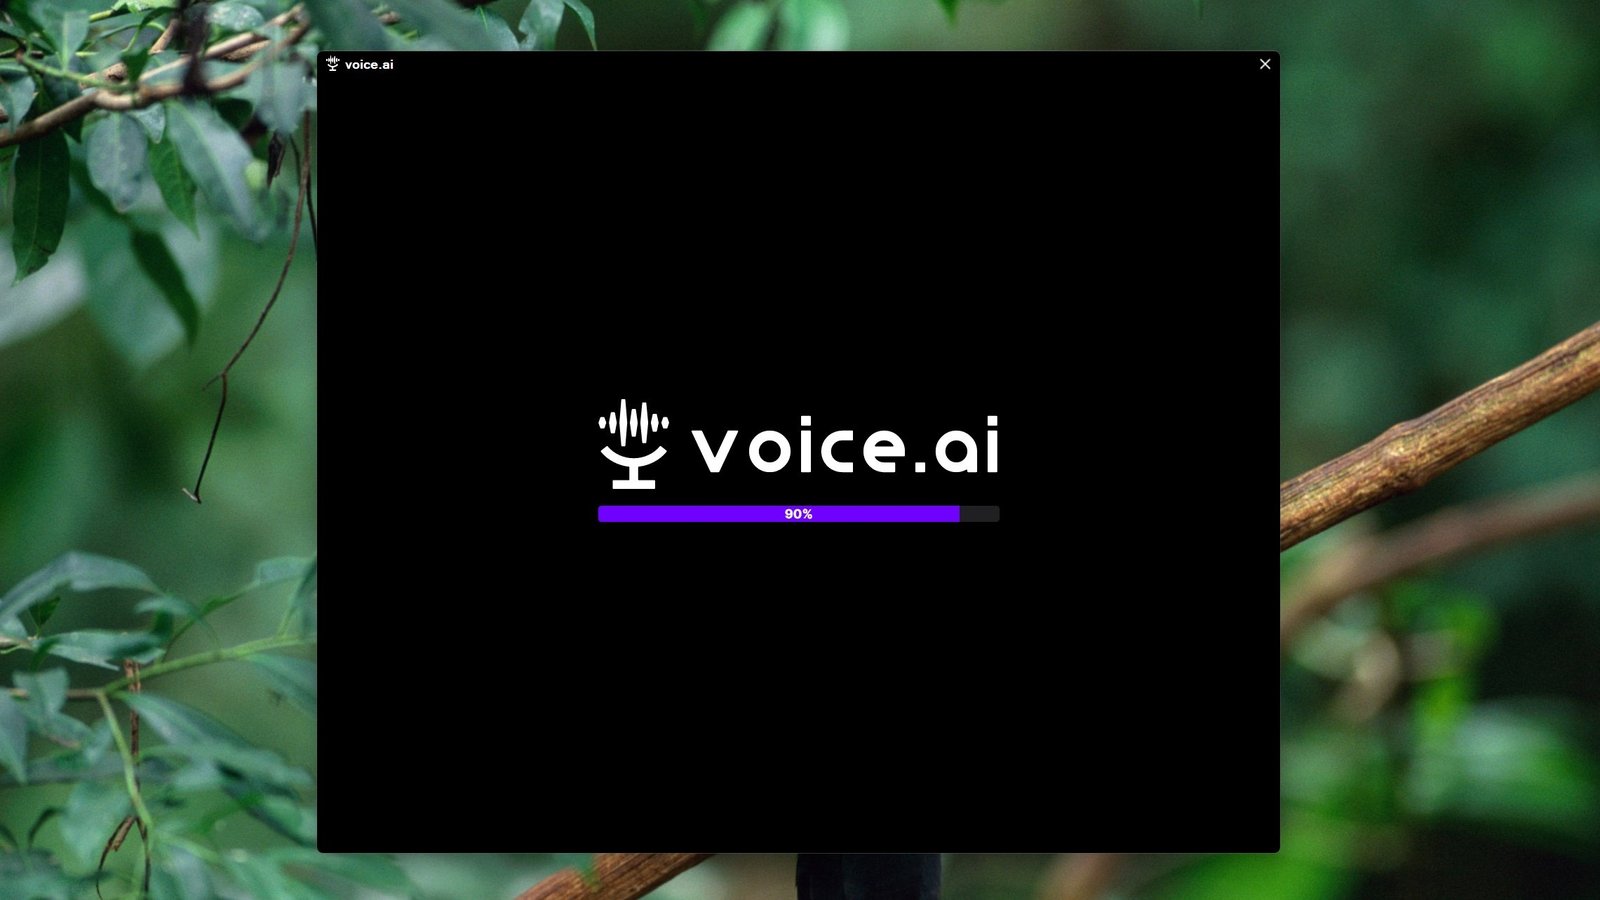 What is Voice.ai? Features and how to use it, explained